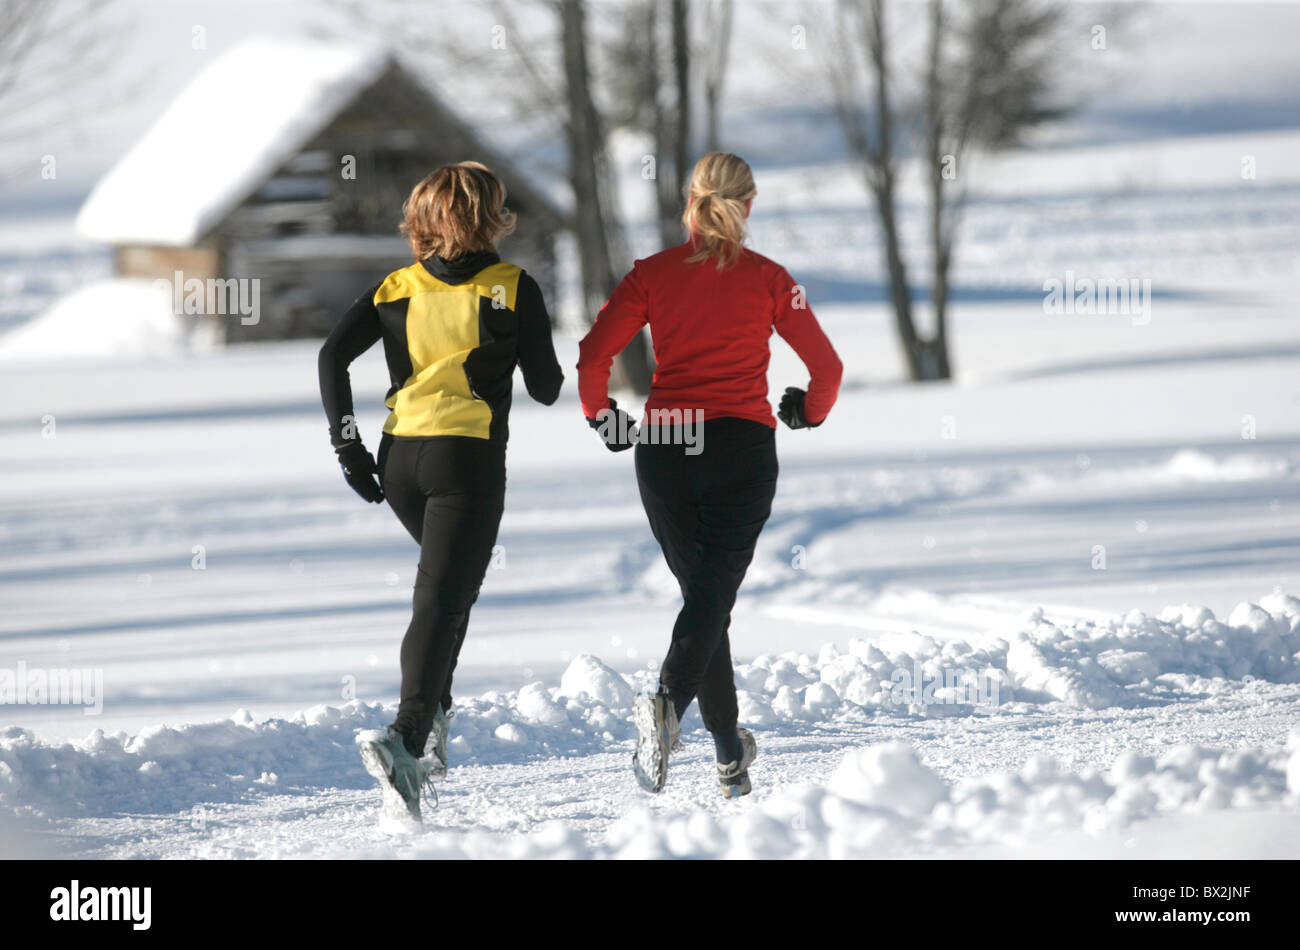 jogging model released mountains running snow sports Alps Two women woman  winter winter sports Europe Stock Photo - Alamy